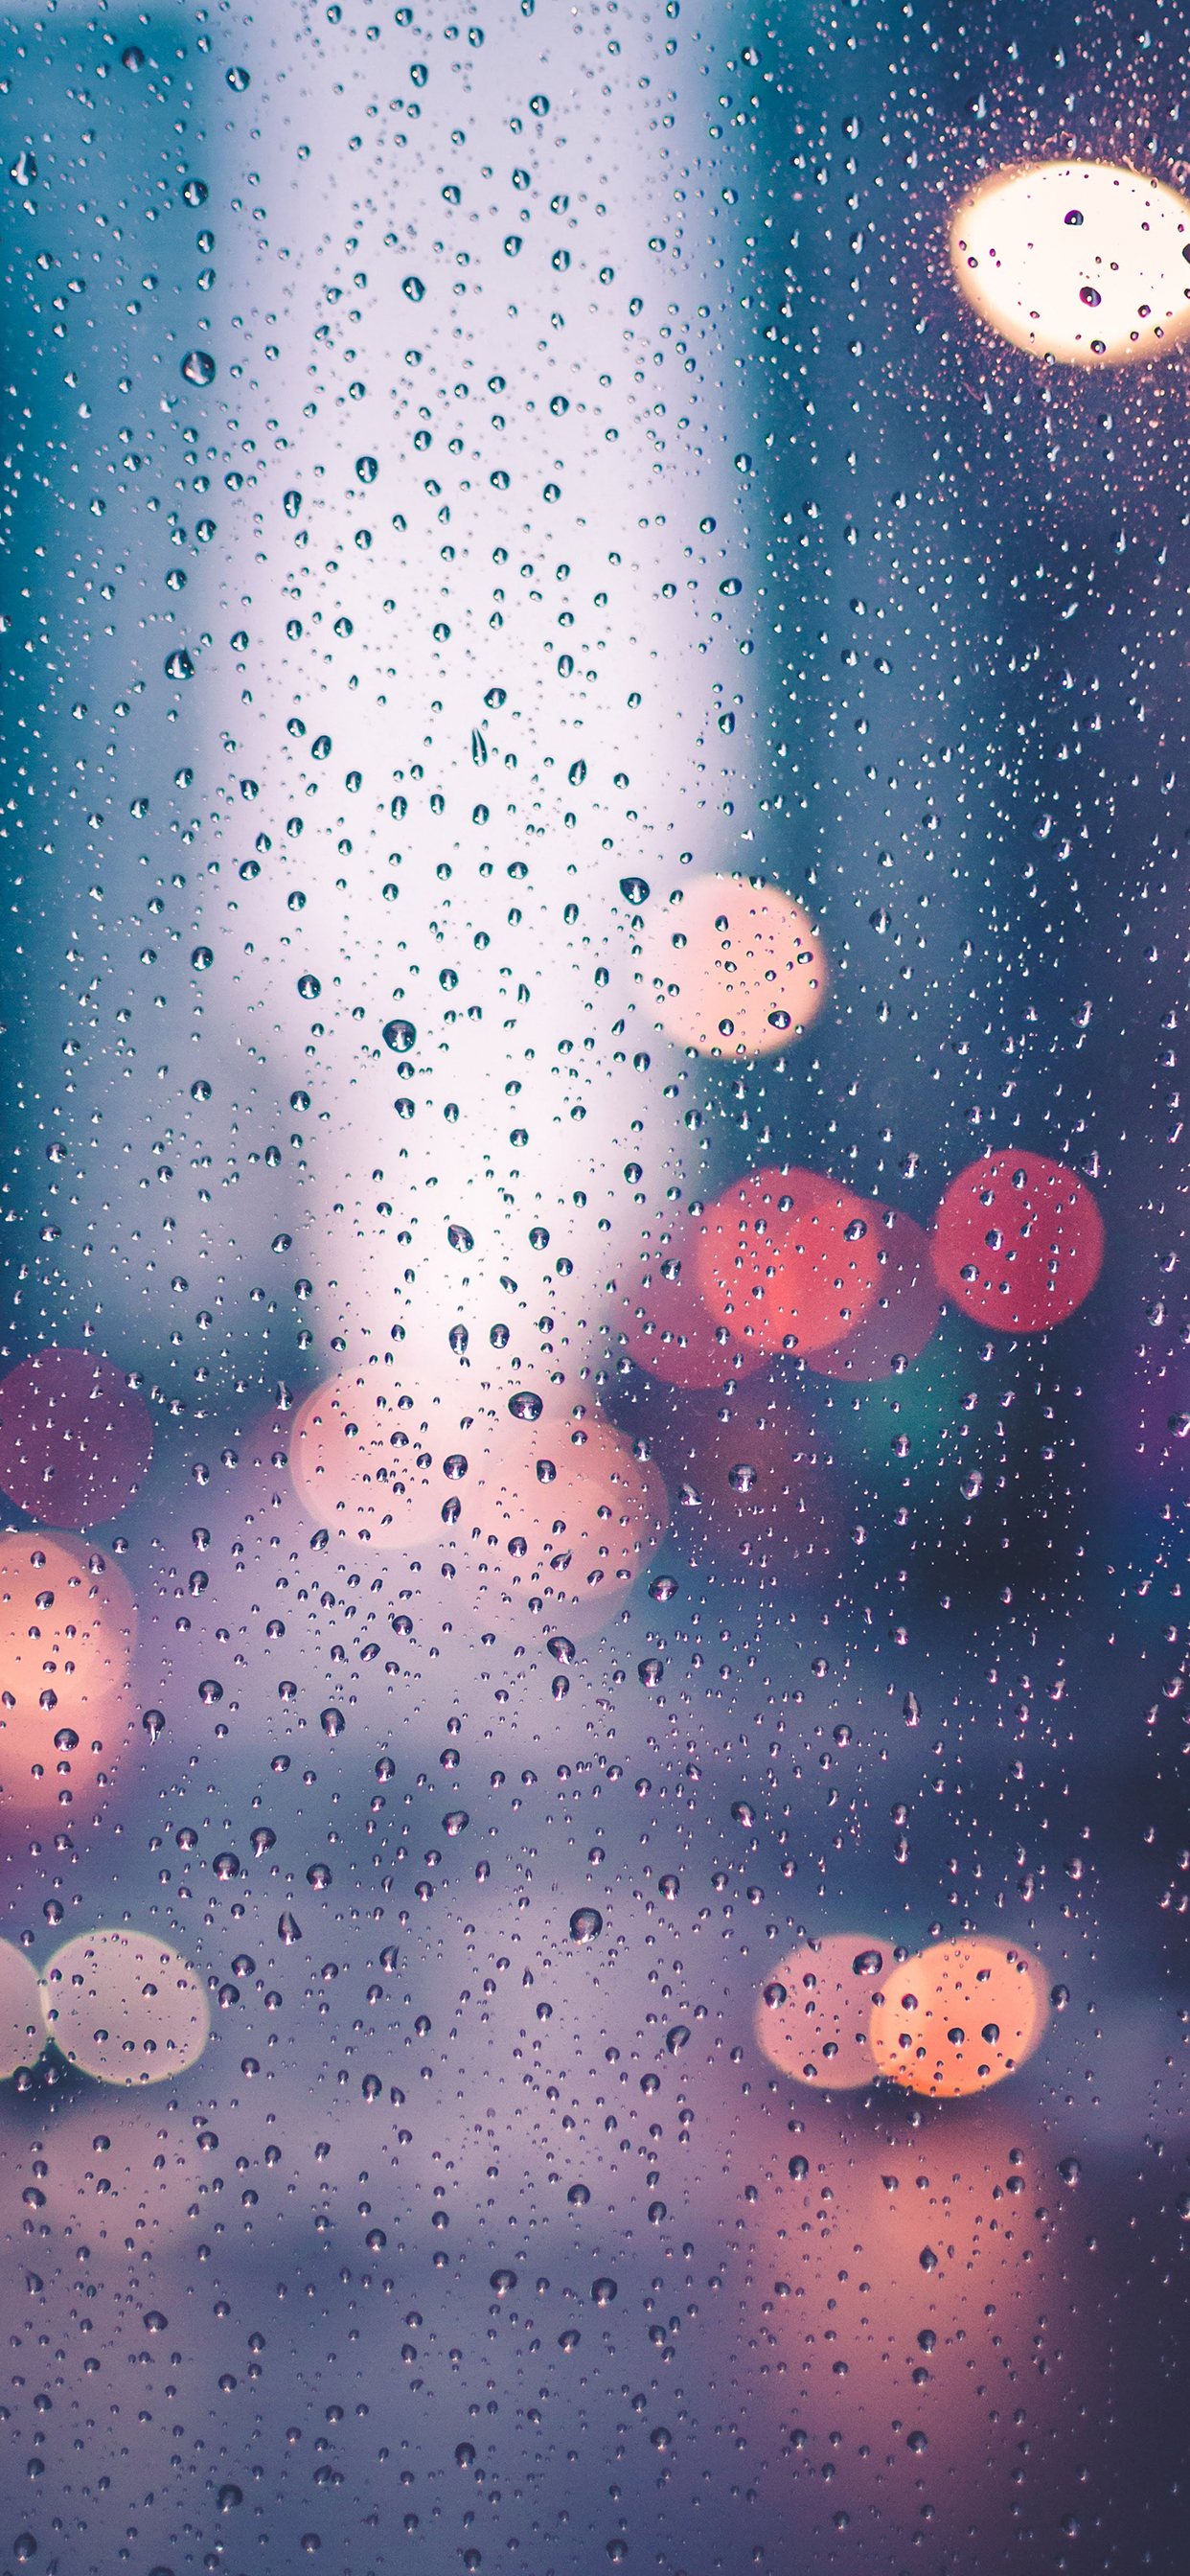 1242x2688 Rain drops Wallpaper for iPhone 11, Pro Max, X, 8, 7, 6 Free Download on 3Wallpapers